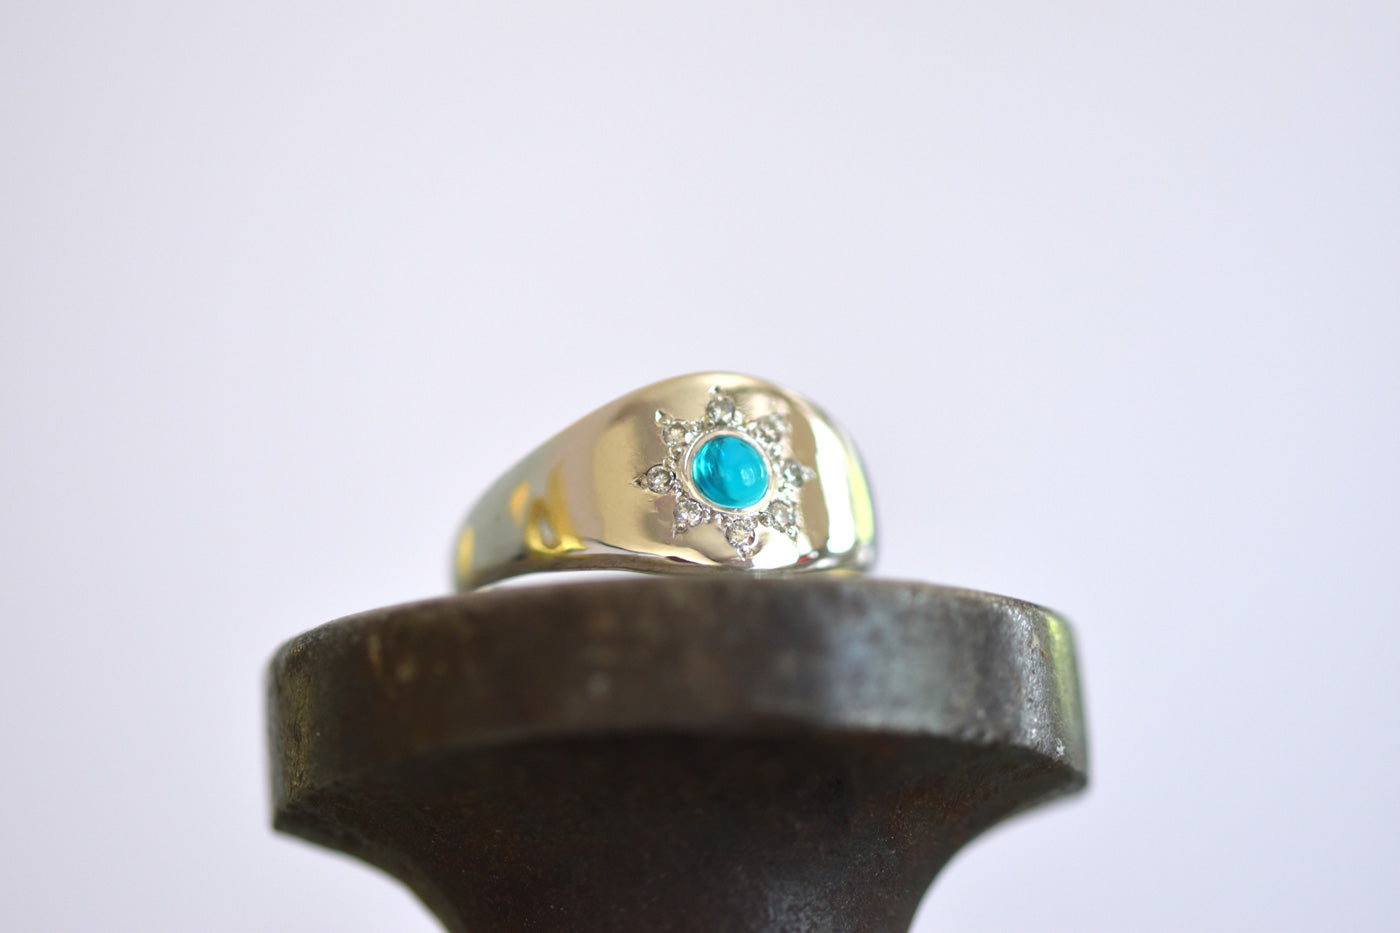 Opal Star Signet Ring on Display